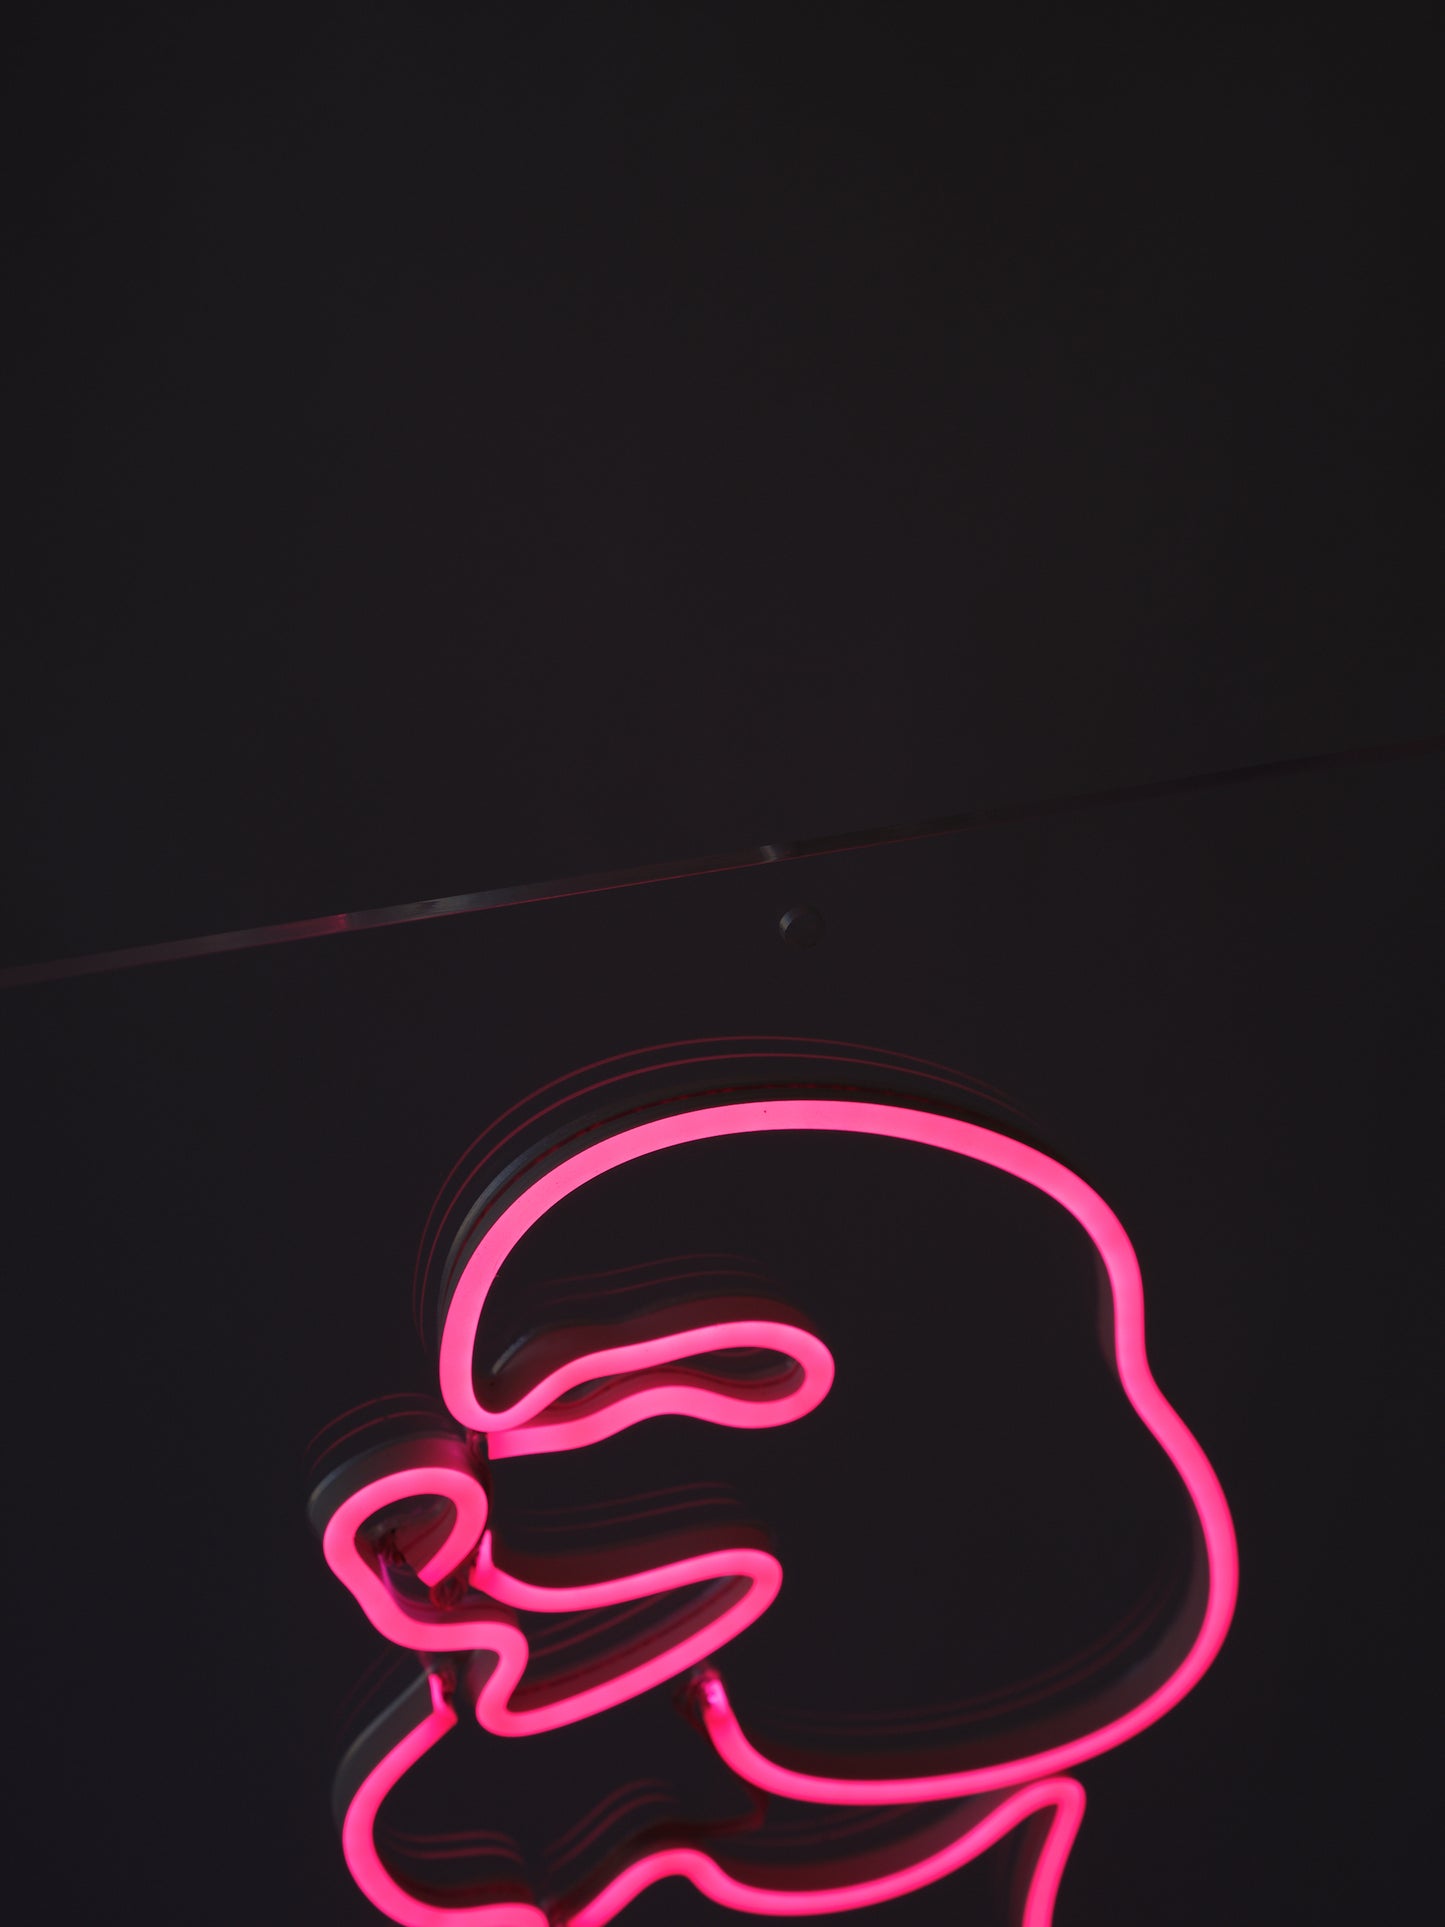 THE POODLE NEONLIGHT